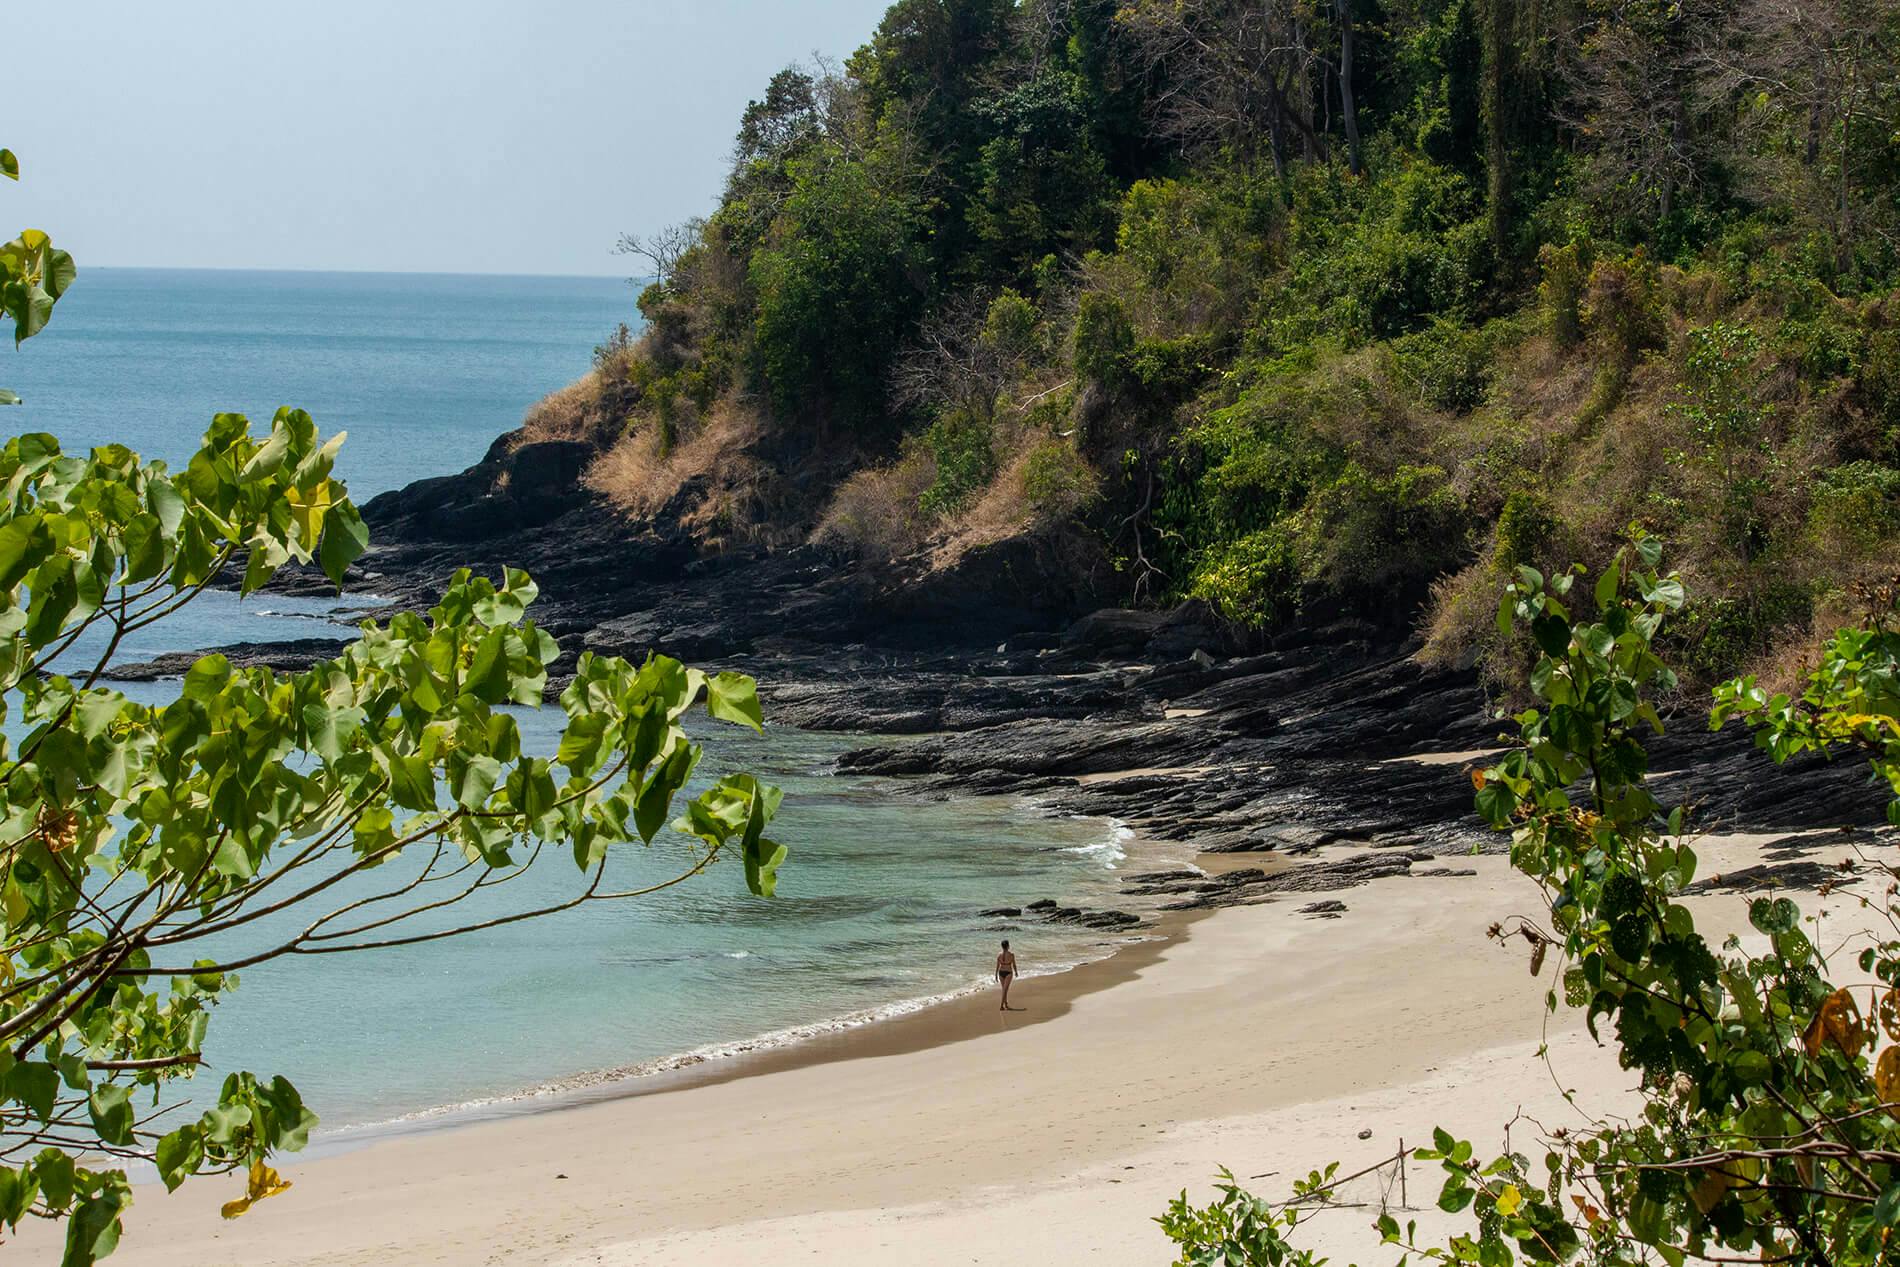 A beautiful beach in Koh Lanta, Thailand. From behind a few branches we can see the sea, the beach, behind which there is a rock full of green trees.